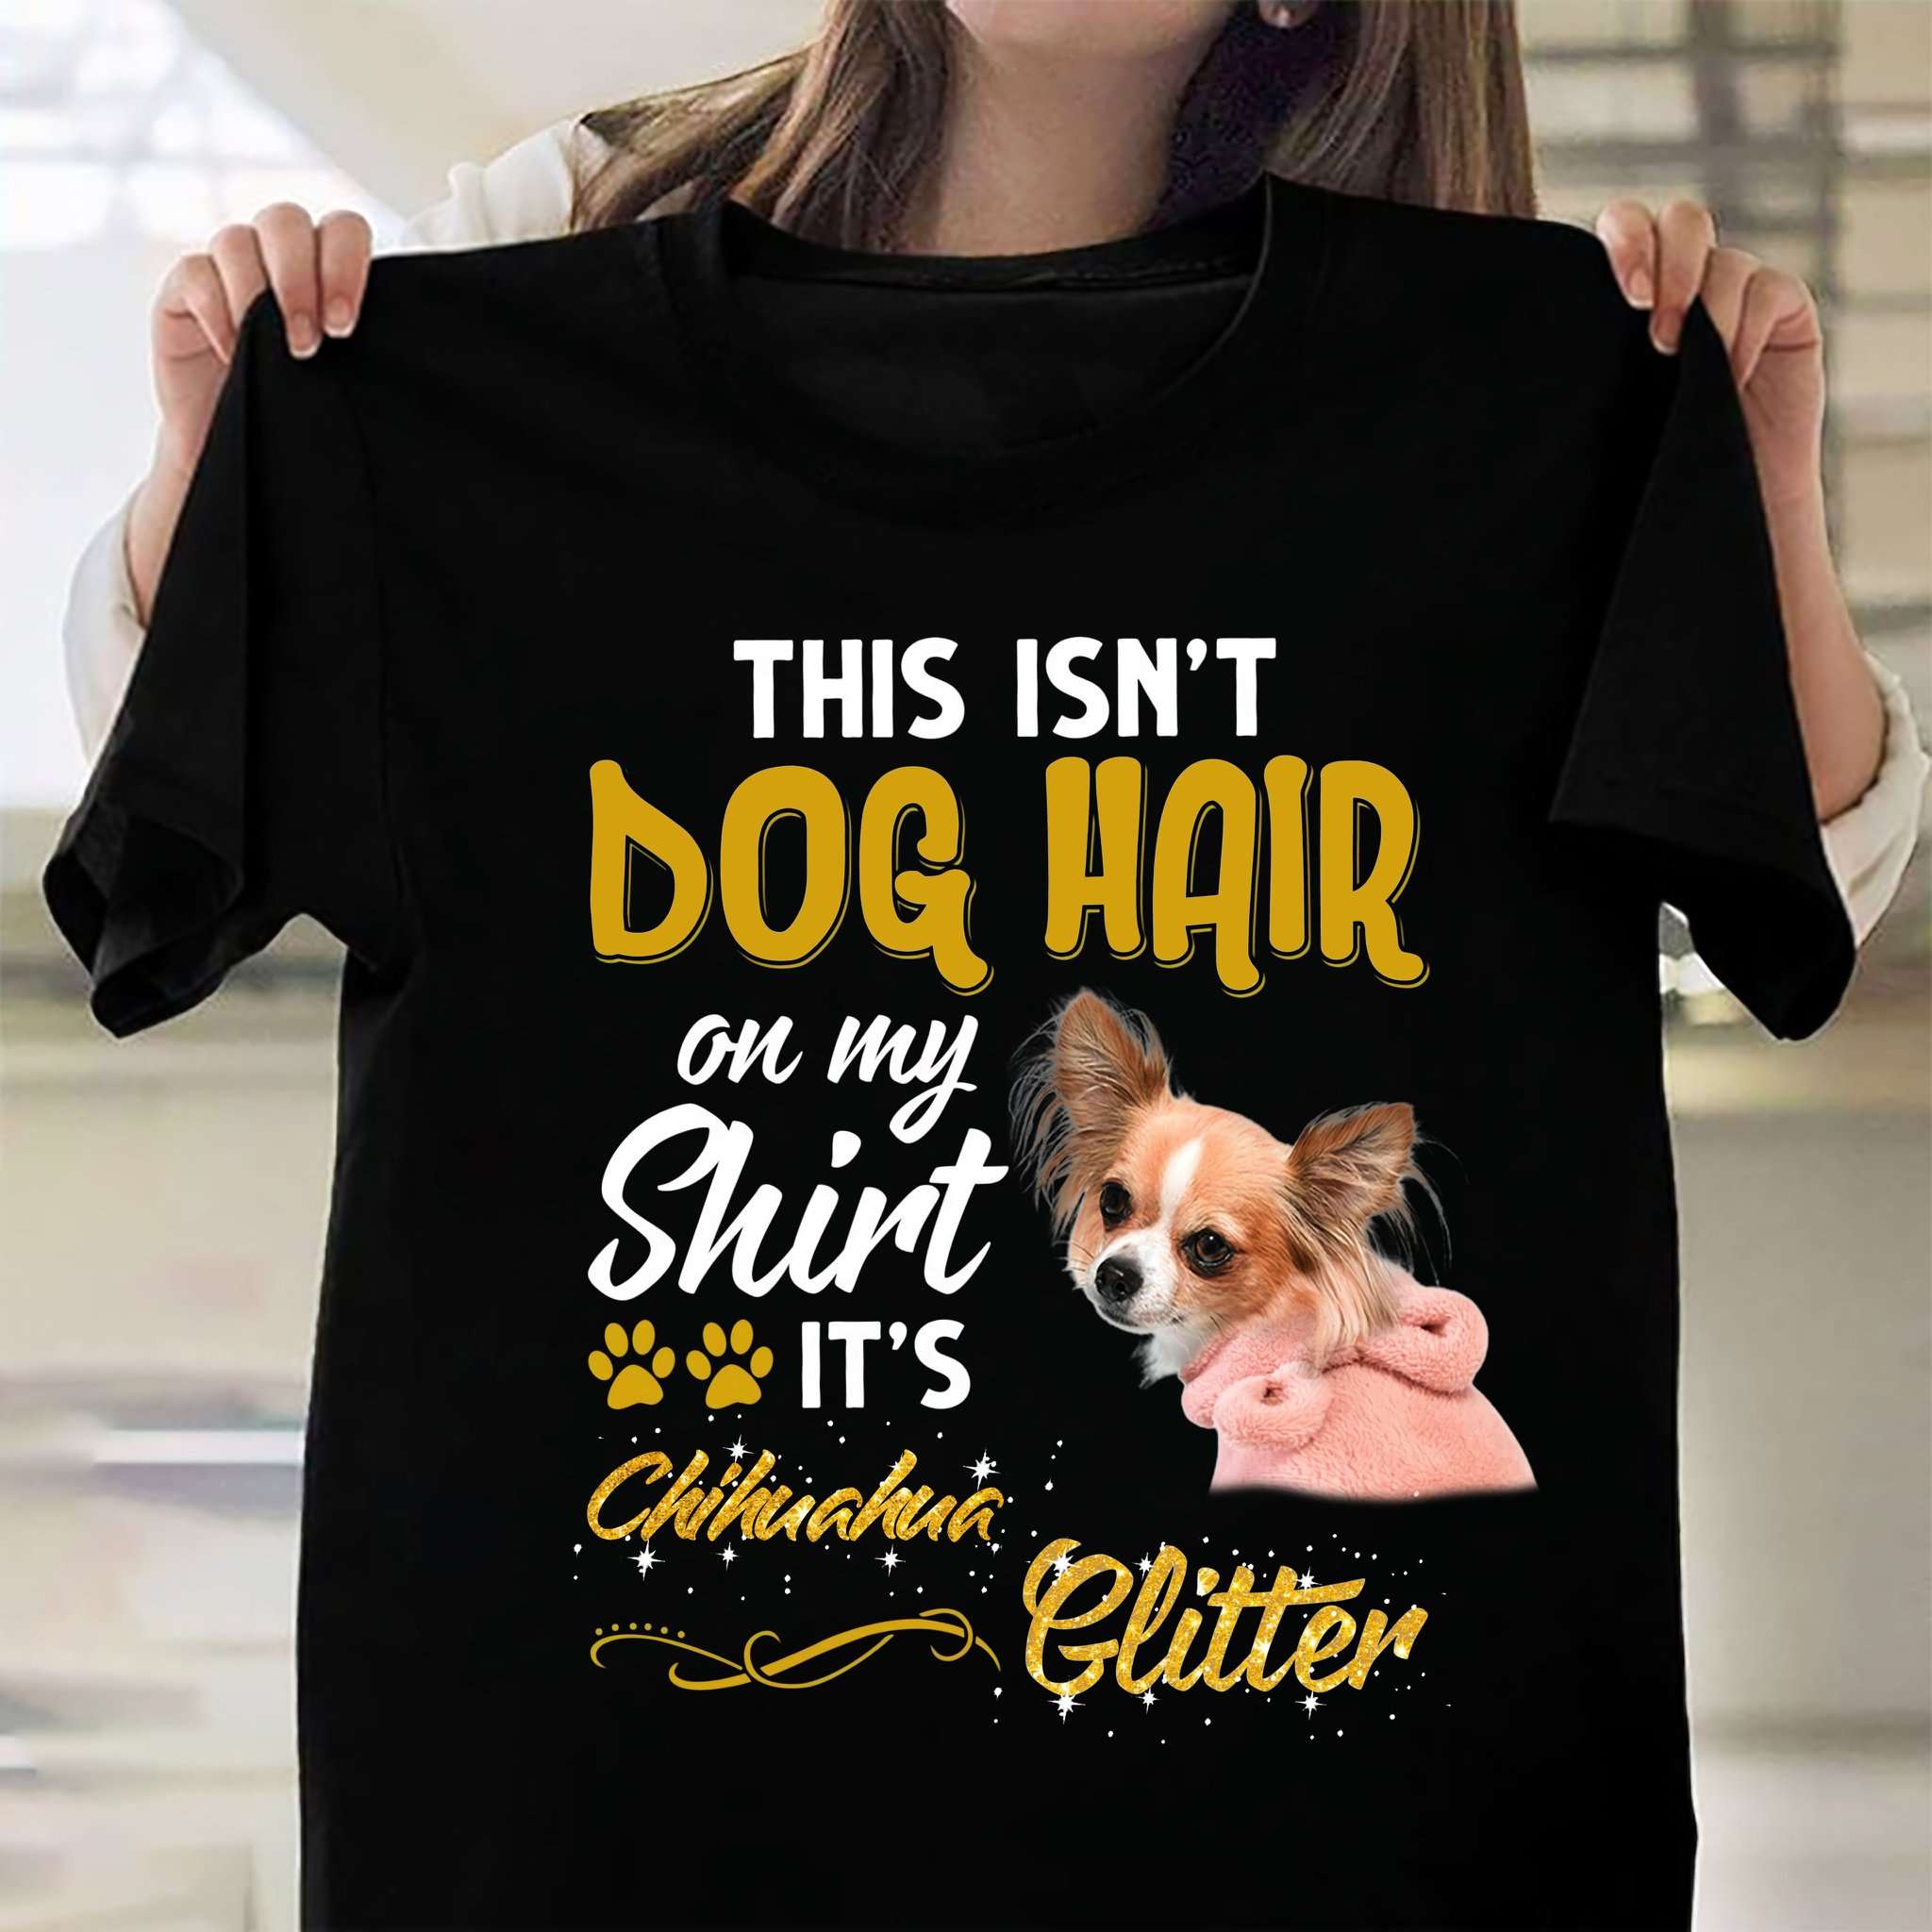 This isn't dog hair on my shirt - It's Chihuahua glitter, Chihuahua dog lover